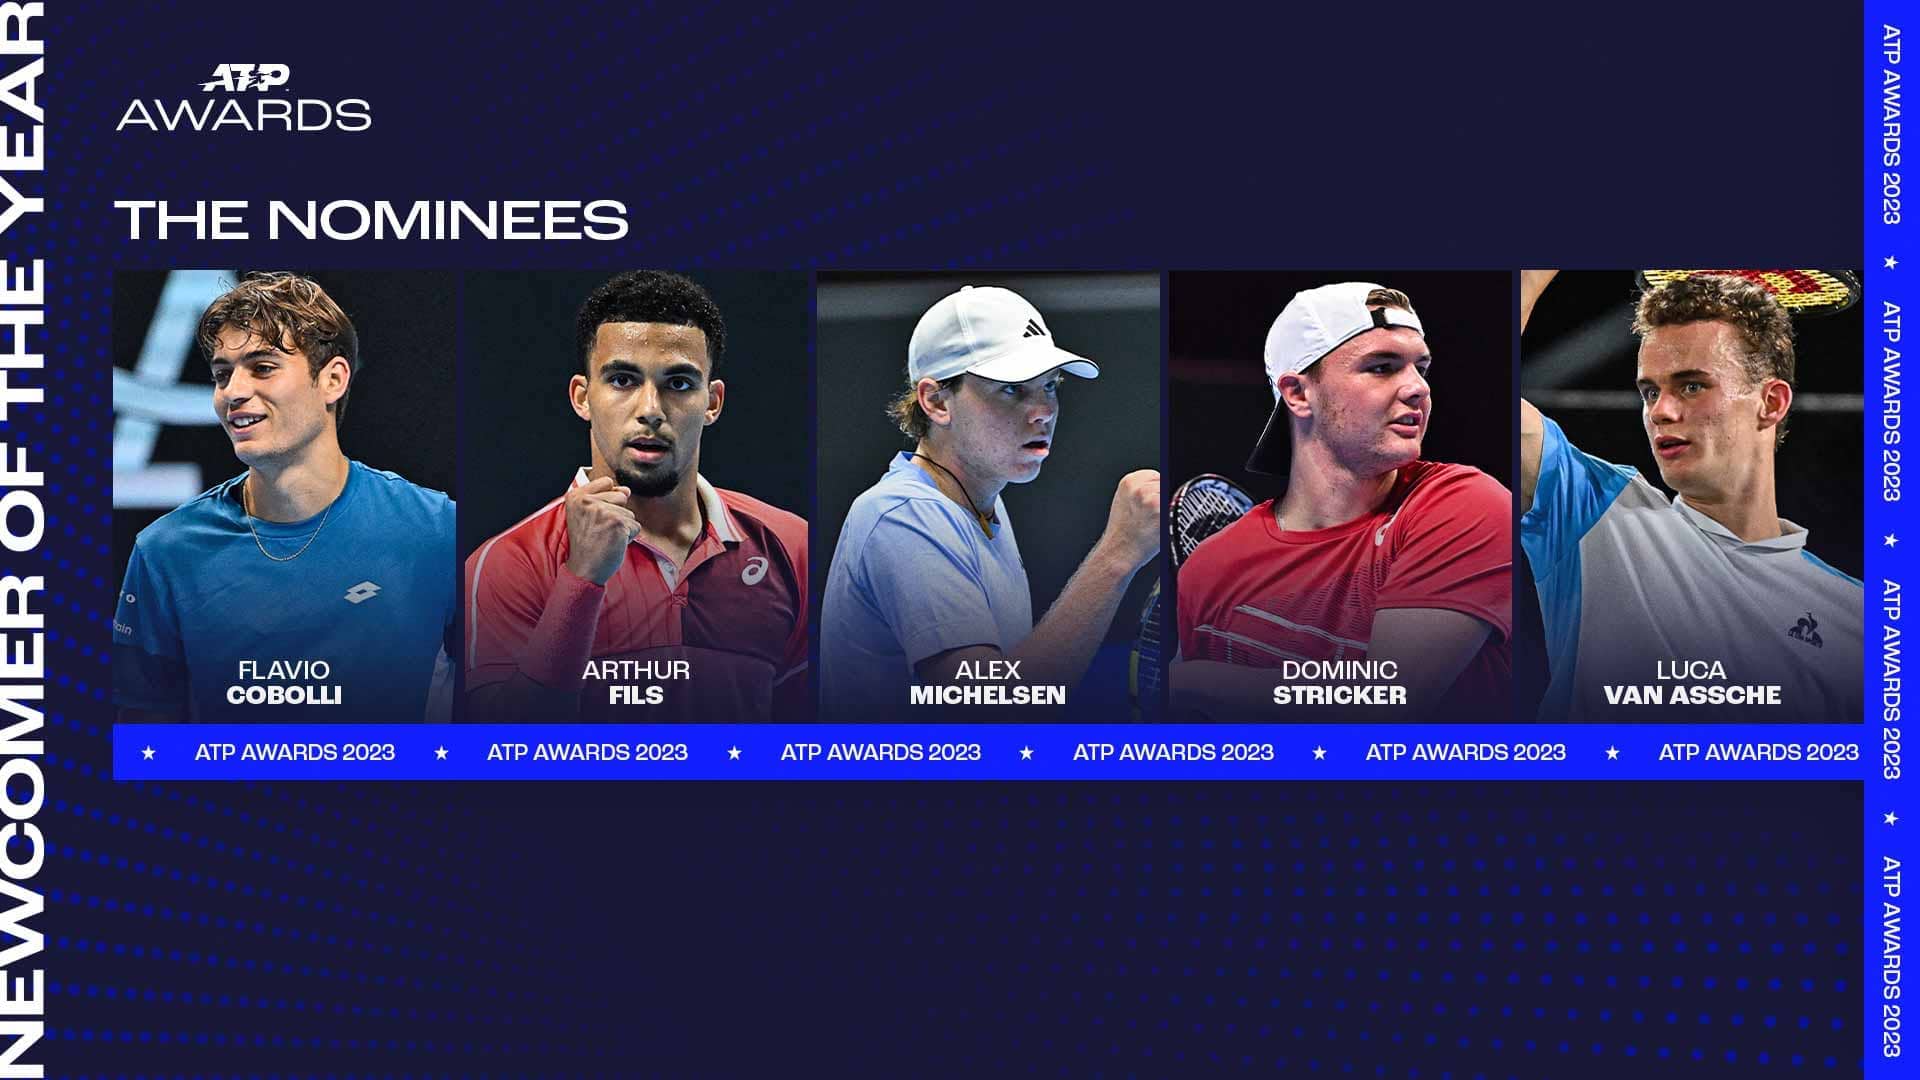 #NextGenATP Stars Nominated For Newcomer Of The Year In 2023 Awards